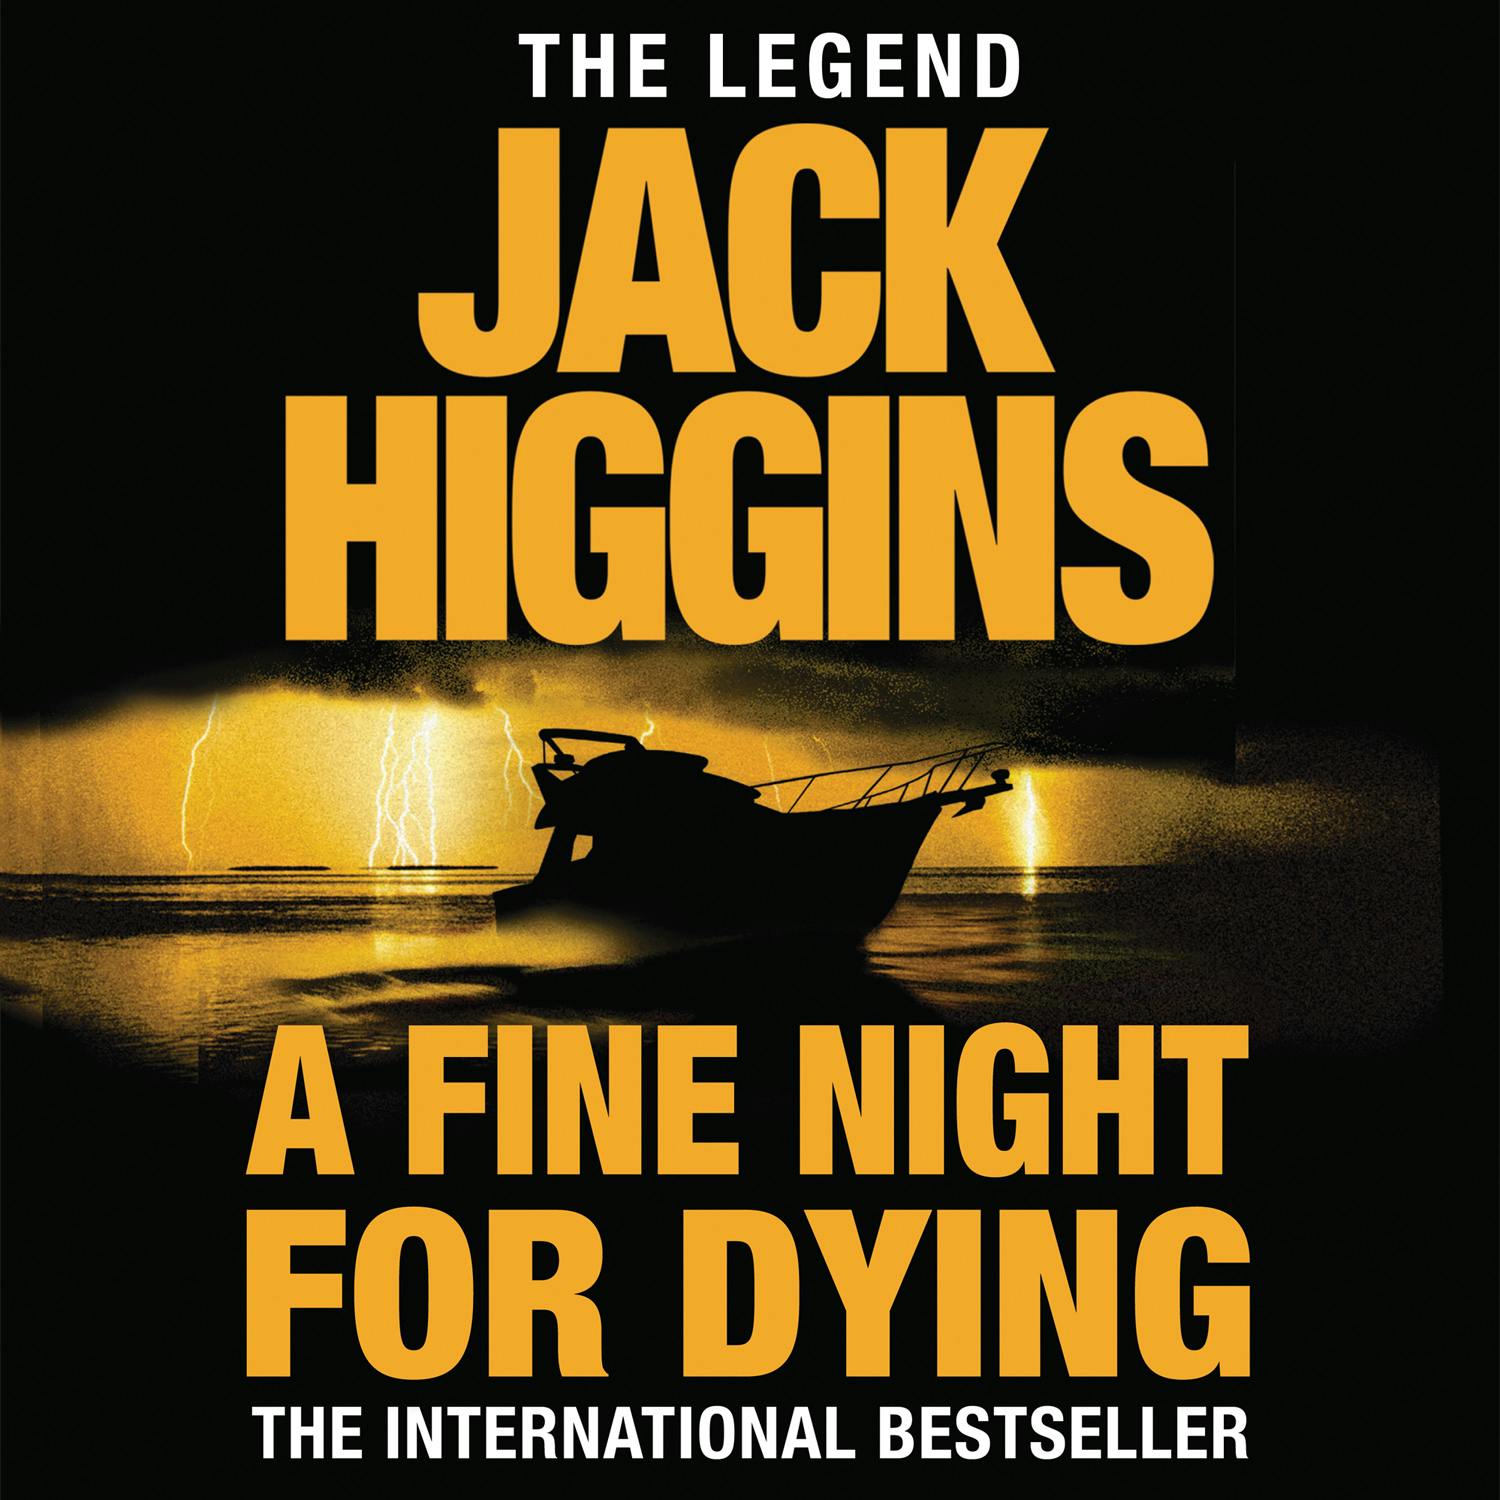 A Fine Night for Dying - Jack Higgins